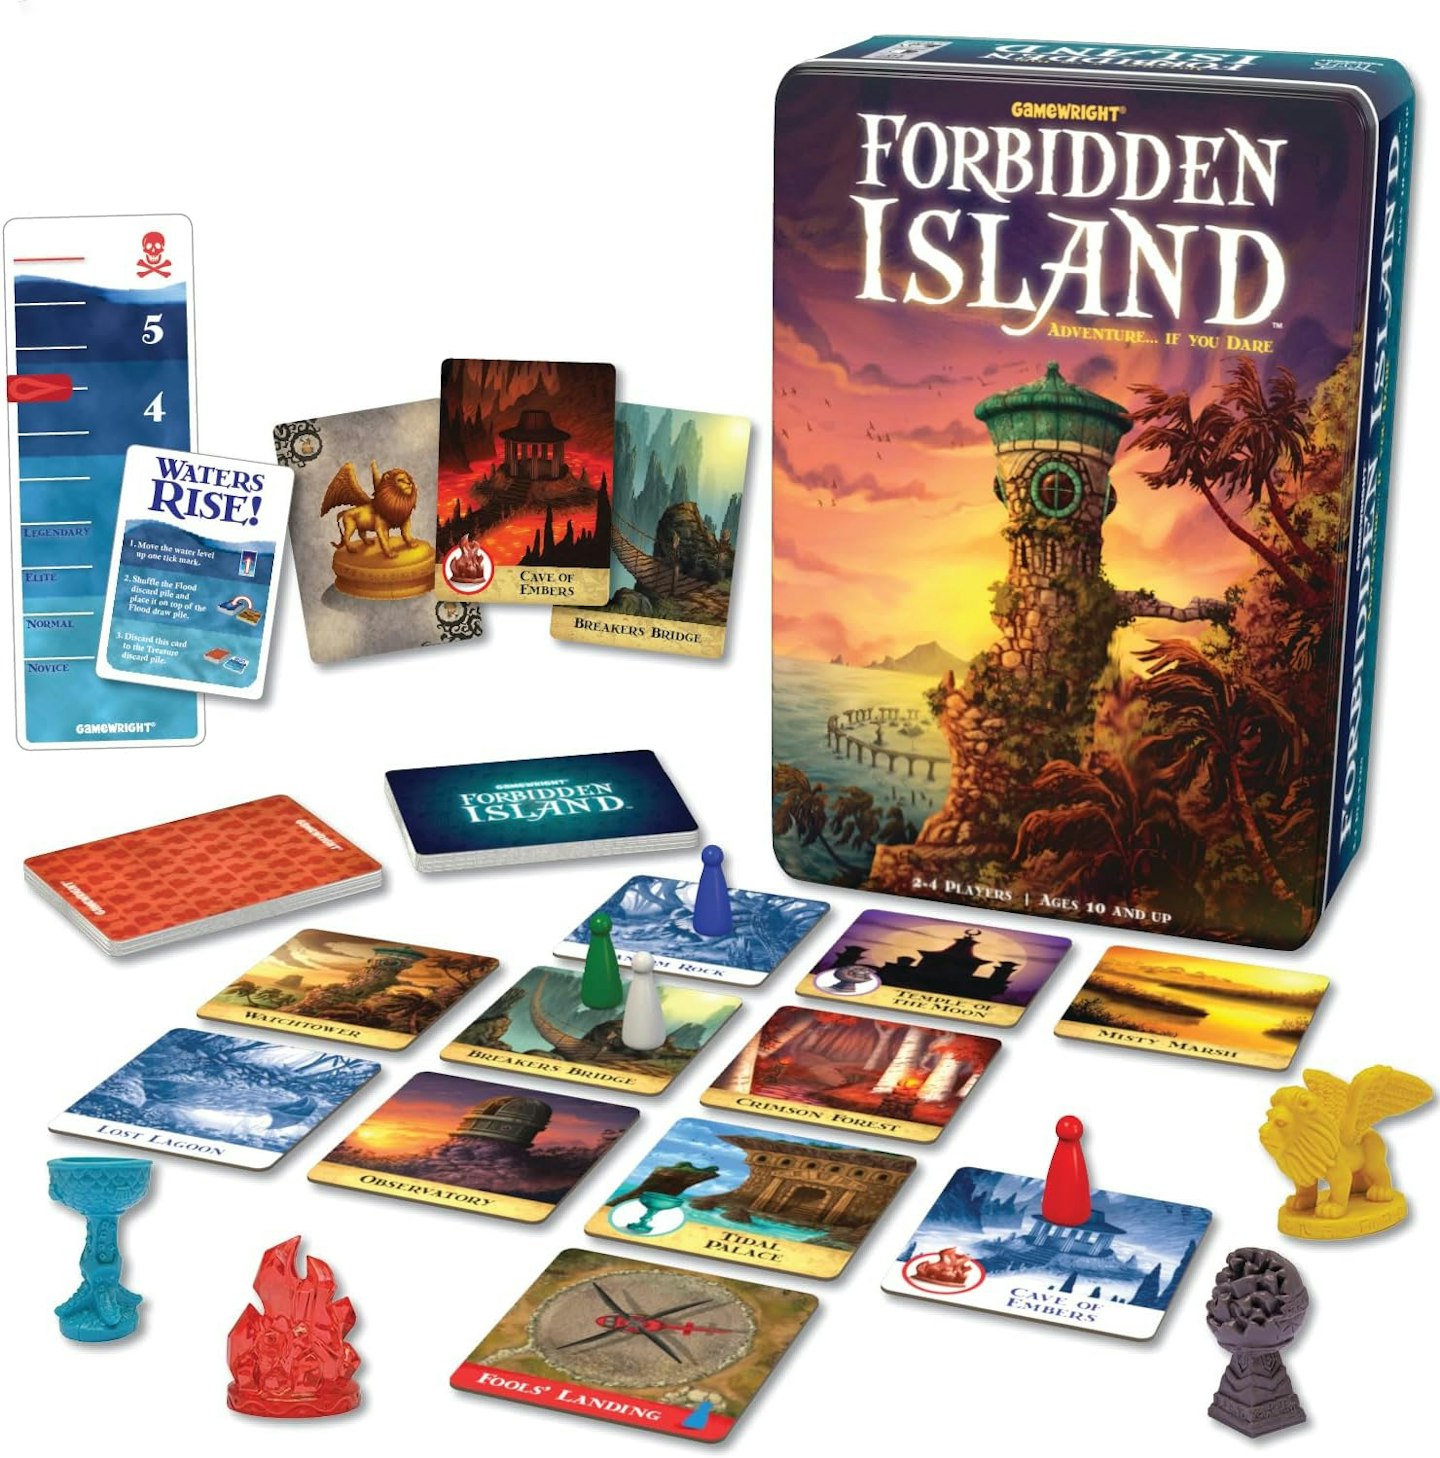 Forbidden Island board game box and contents